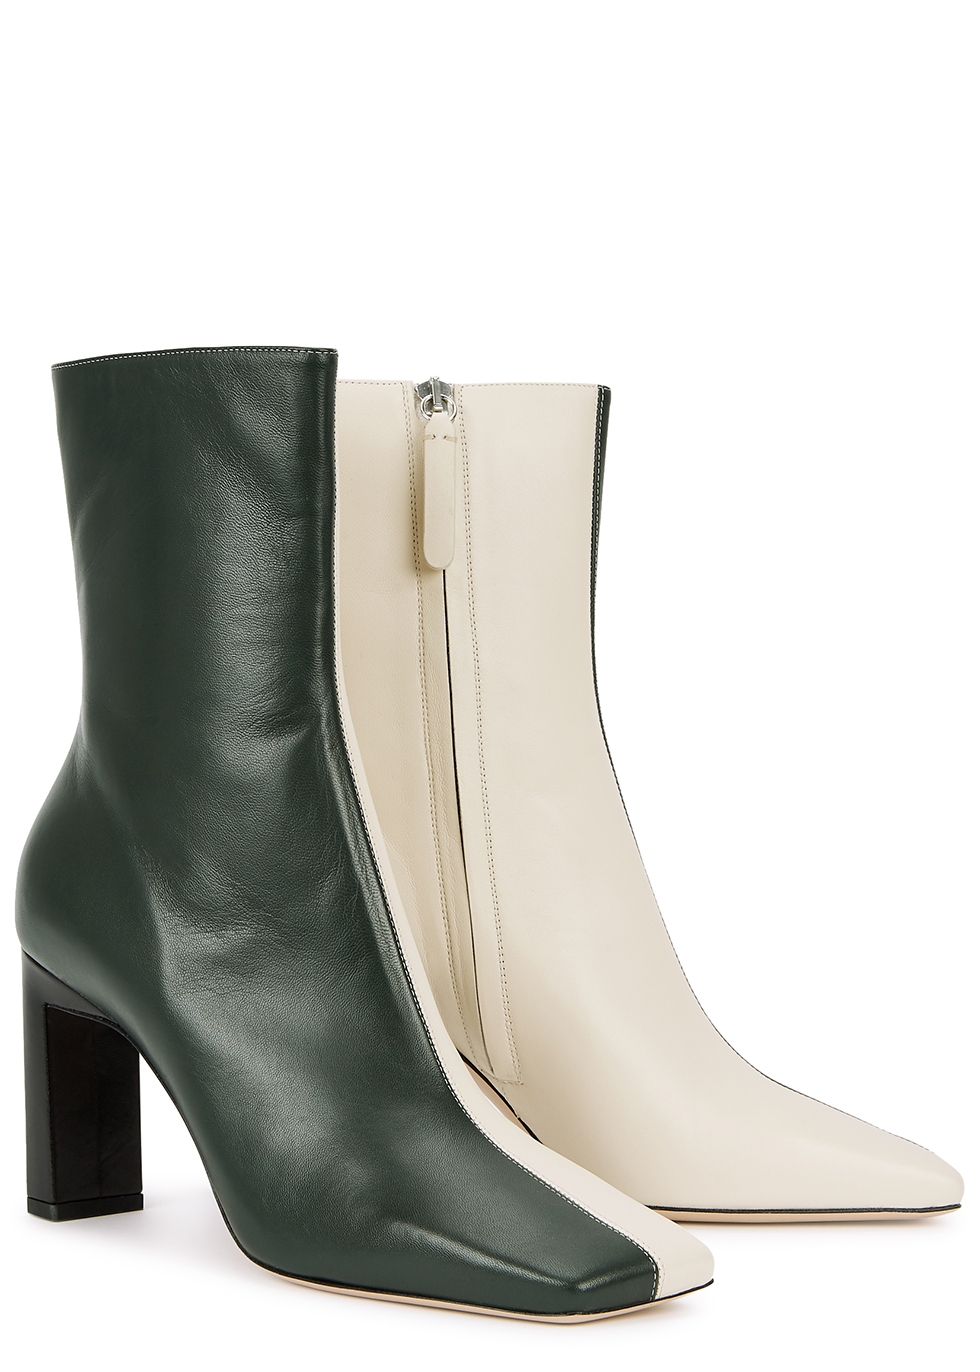 green leather boots